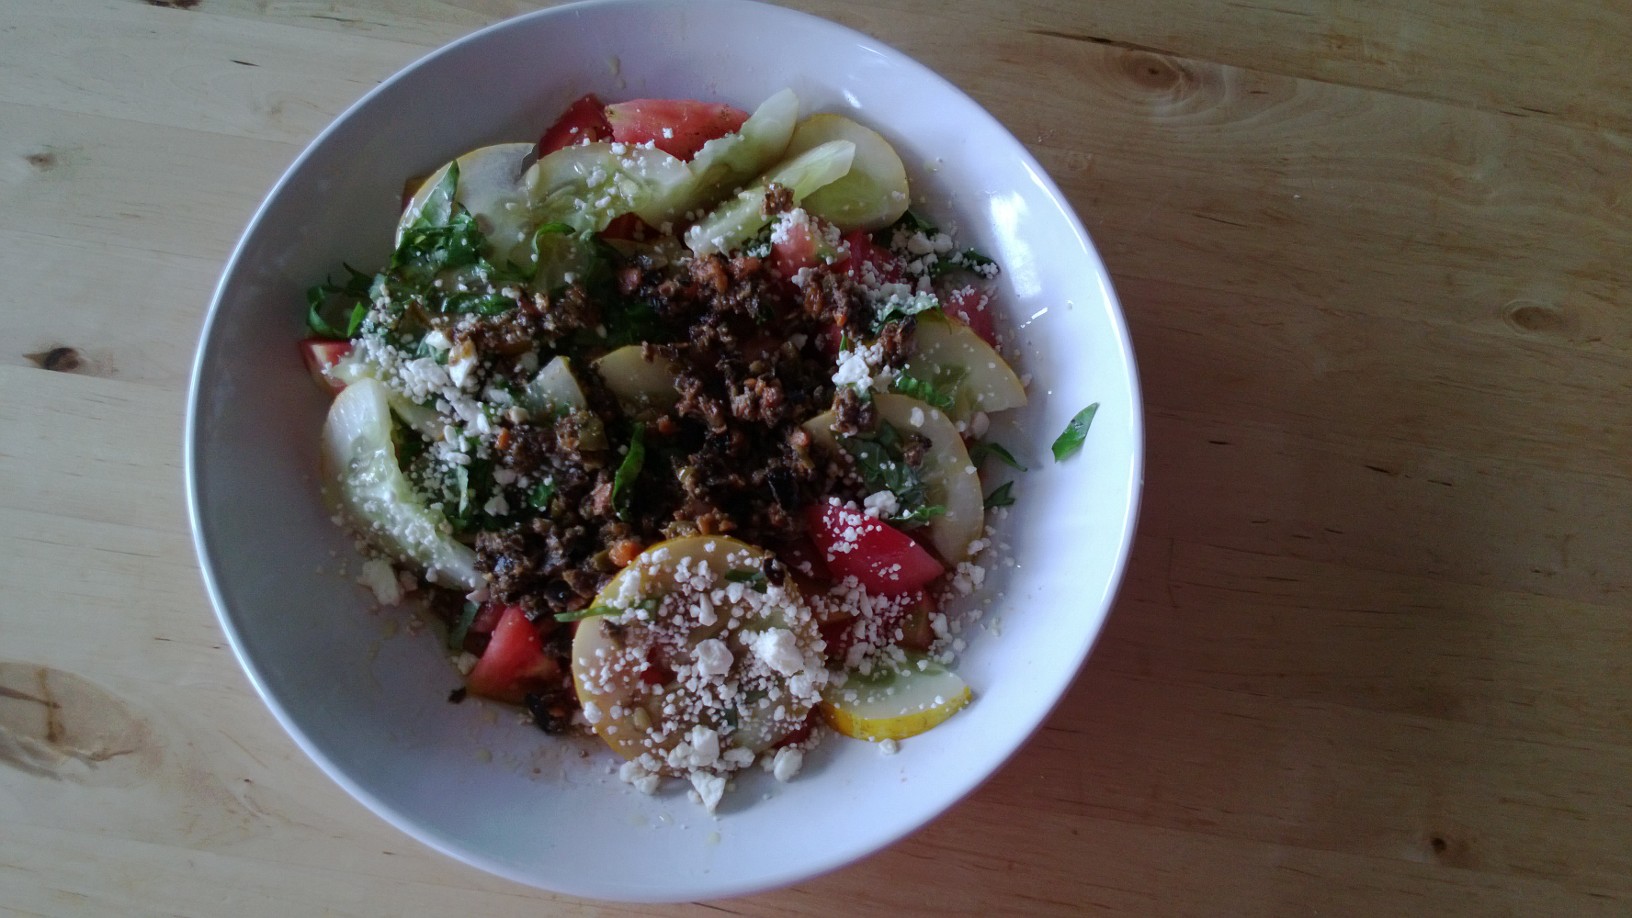 Today Greek Style salad thanks to @tinysorganic weekly delivery. Great tomatoes! 